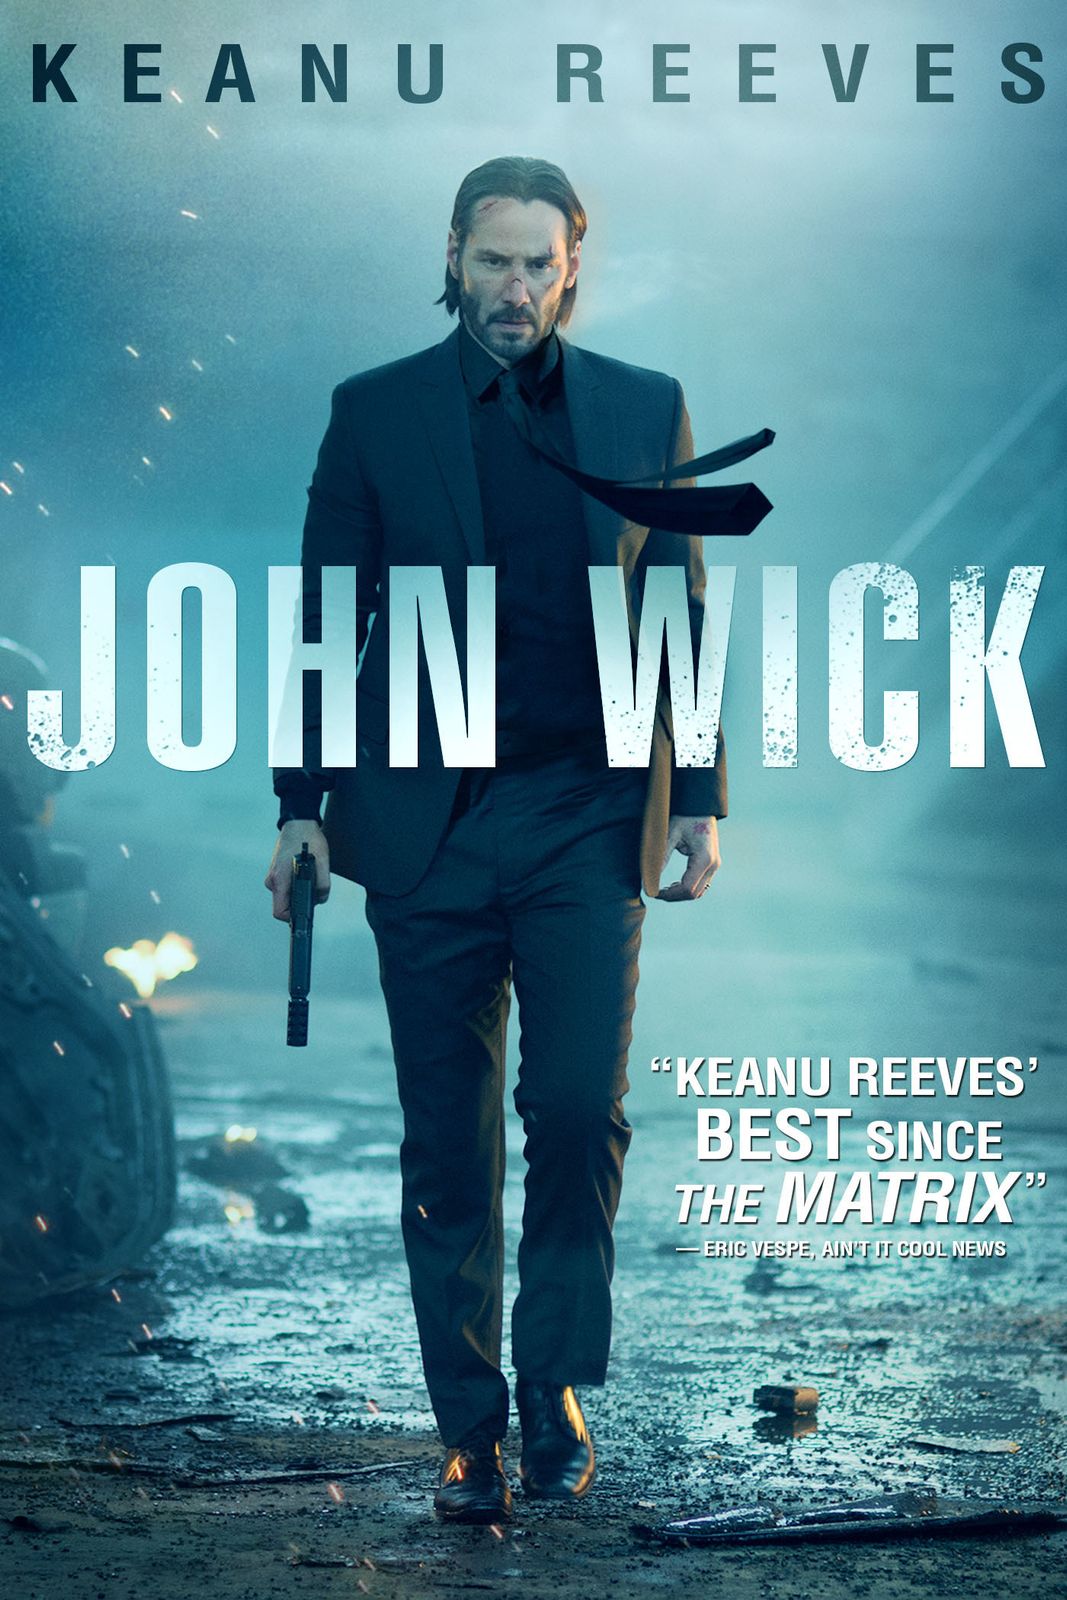 Keanu Reeves to return for John Wick sequel